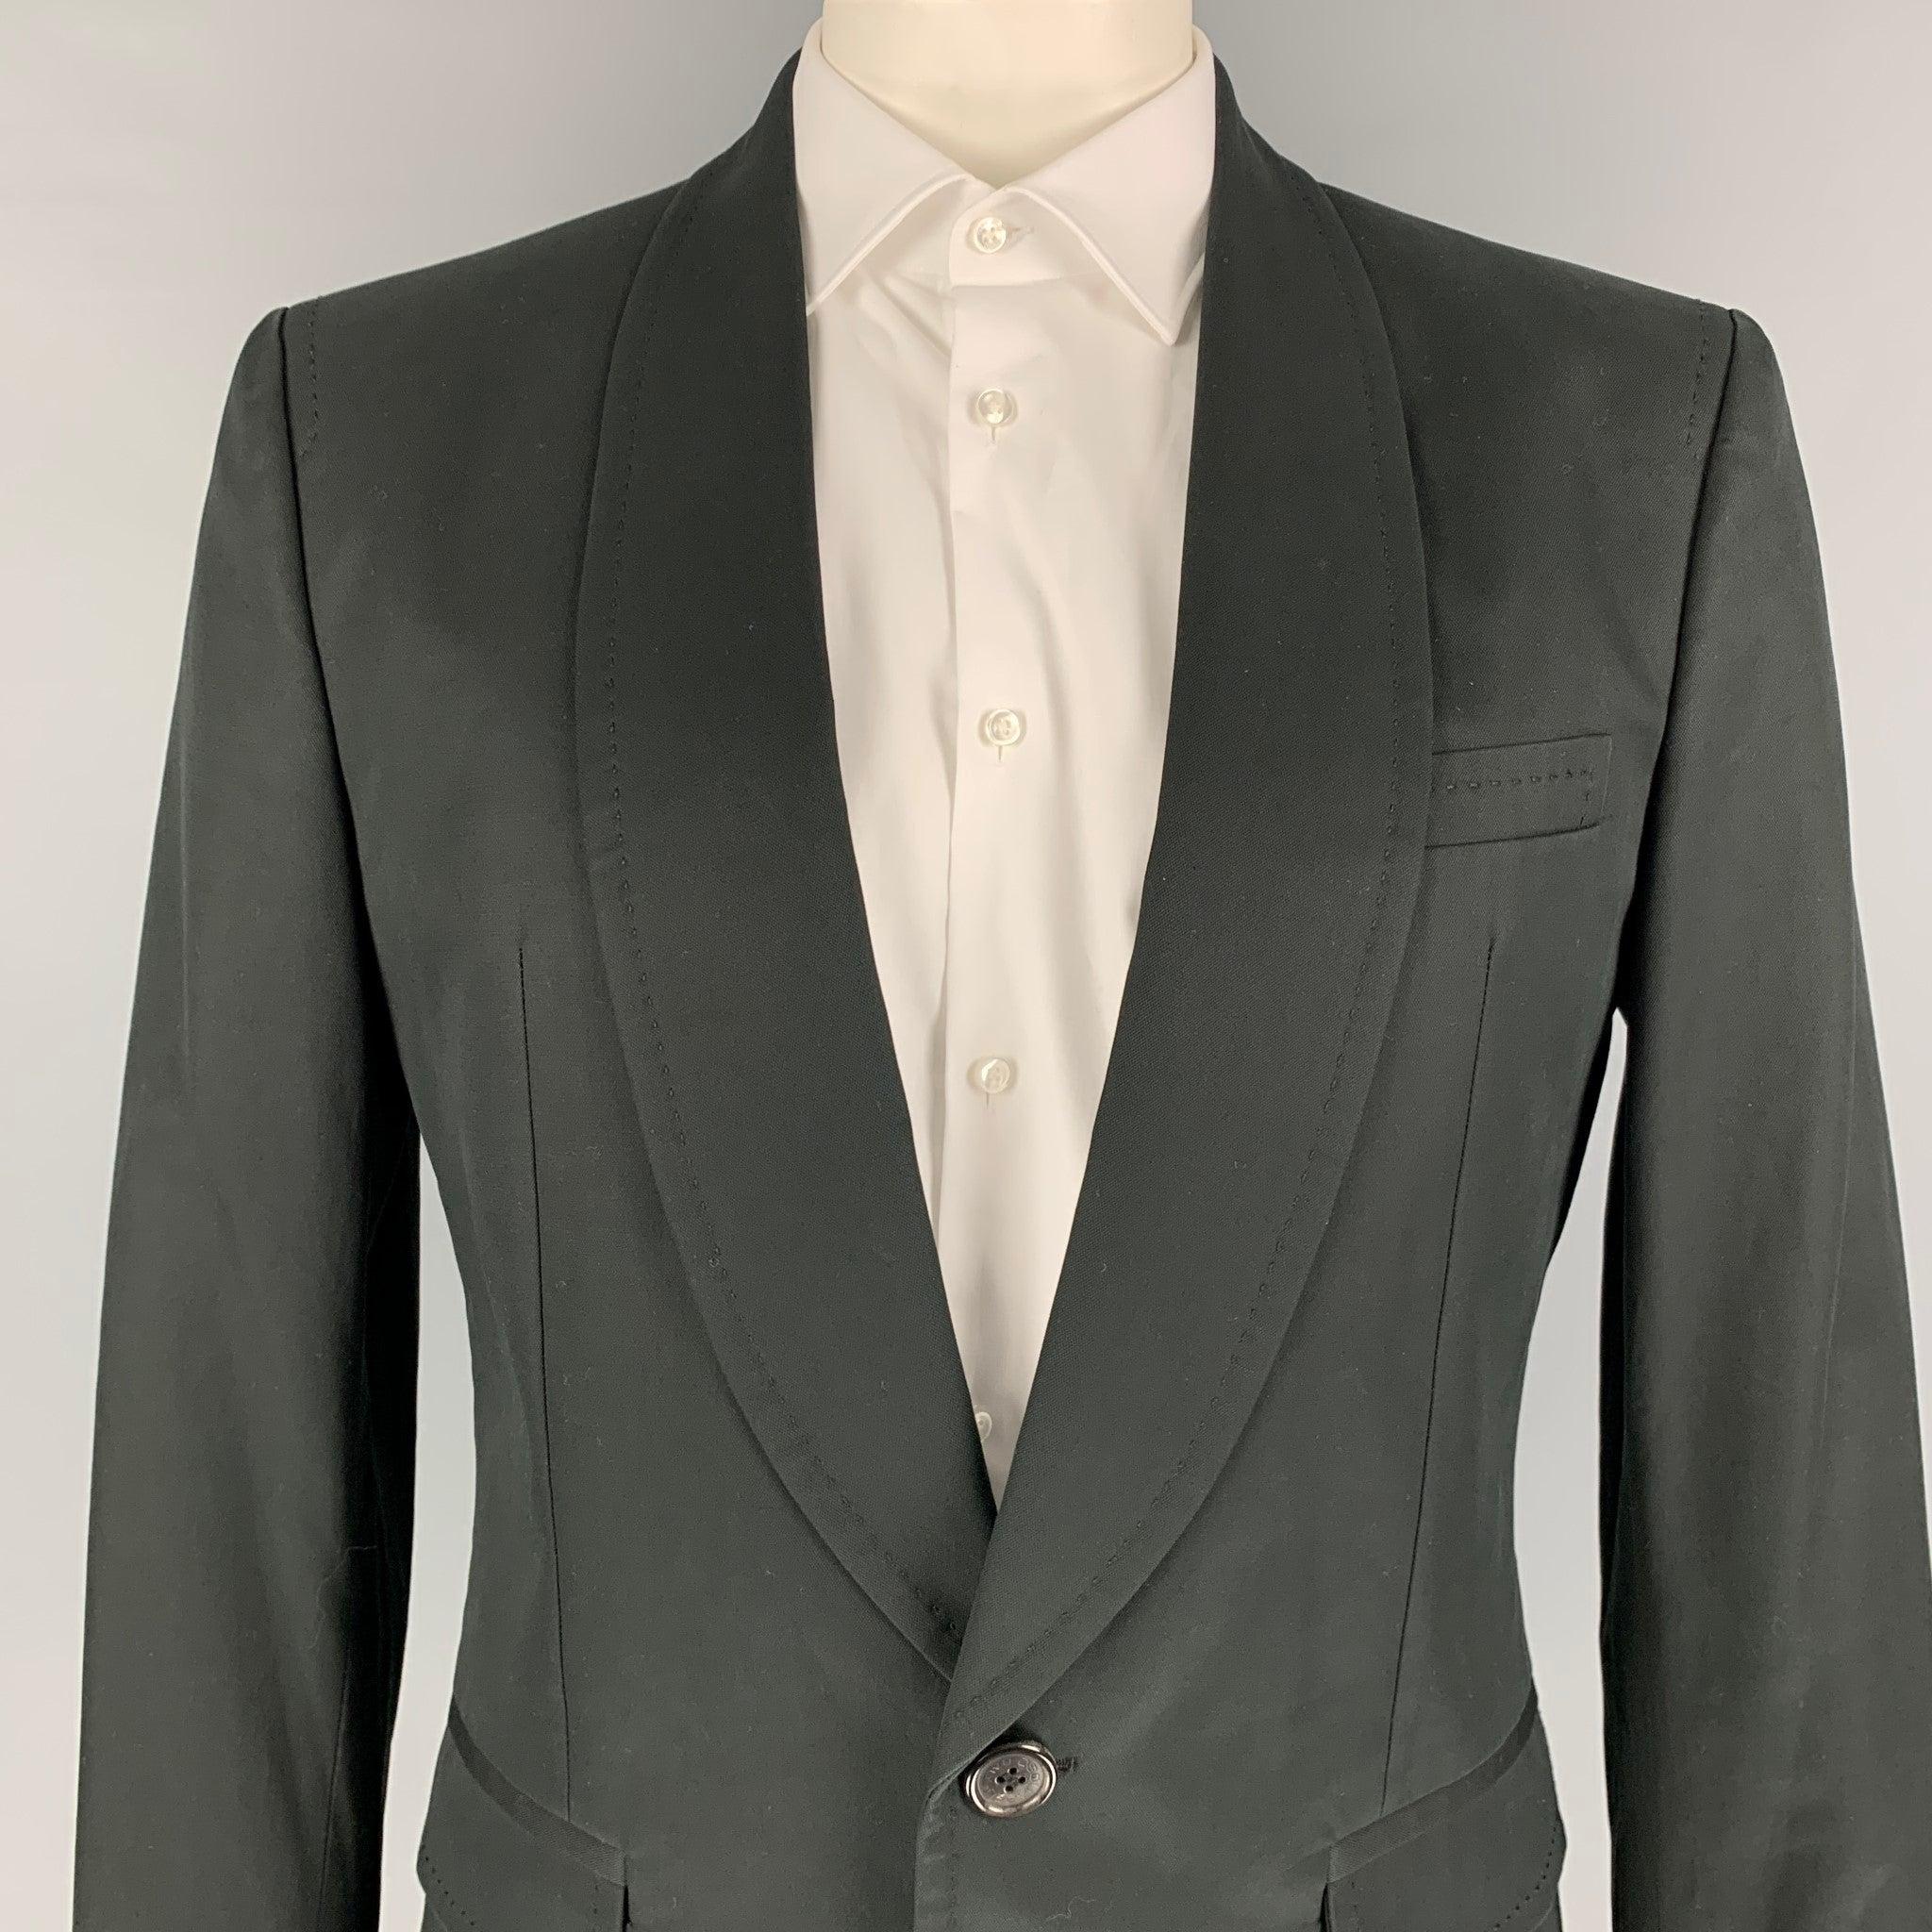 DSQUARED2 sport coat comes in a black cotton with a full liner featuring a shawl collar, flap pockets, single back vent, and a single button closure. Made in Italy.
Very Good
Pre-Owned Condition. 

Marked:   Size tag removed.  

Measurements: 
